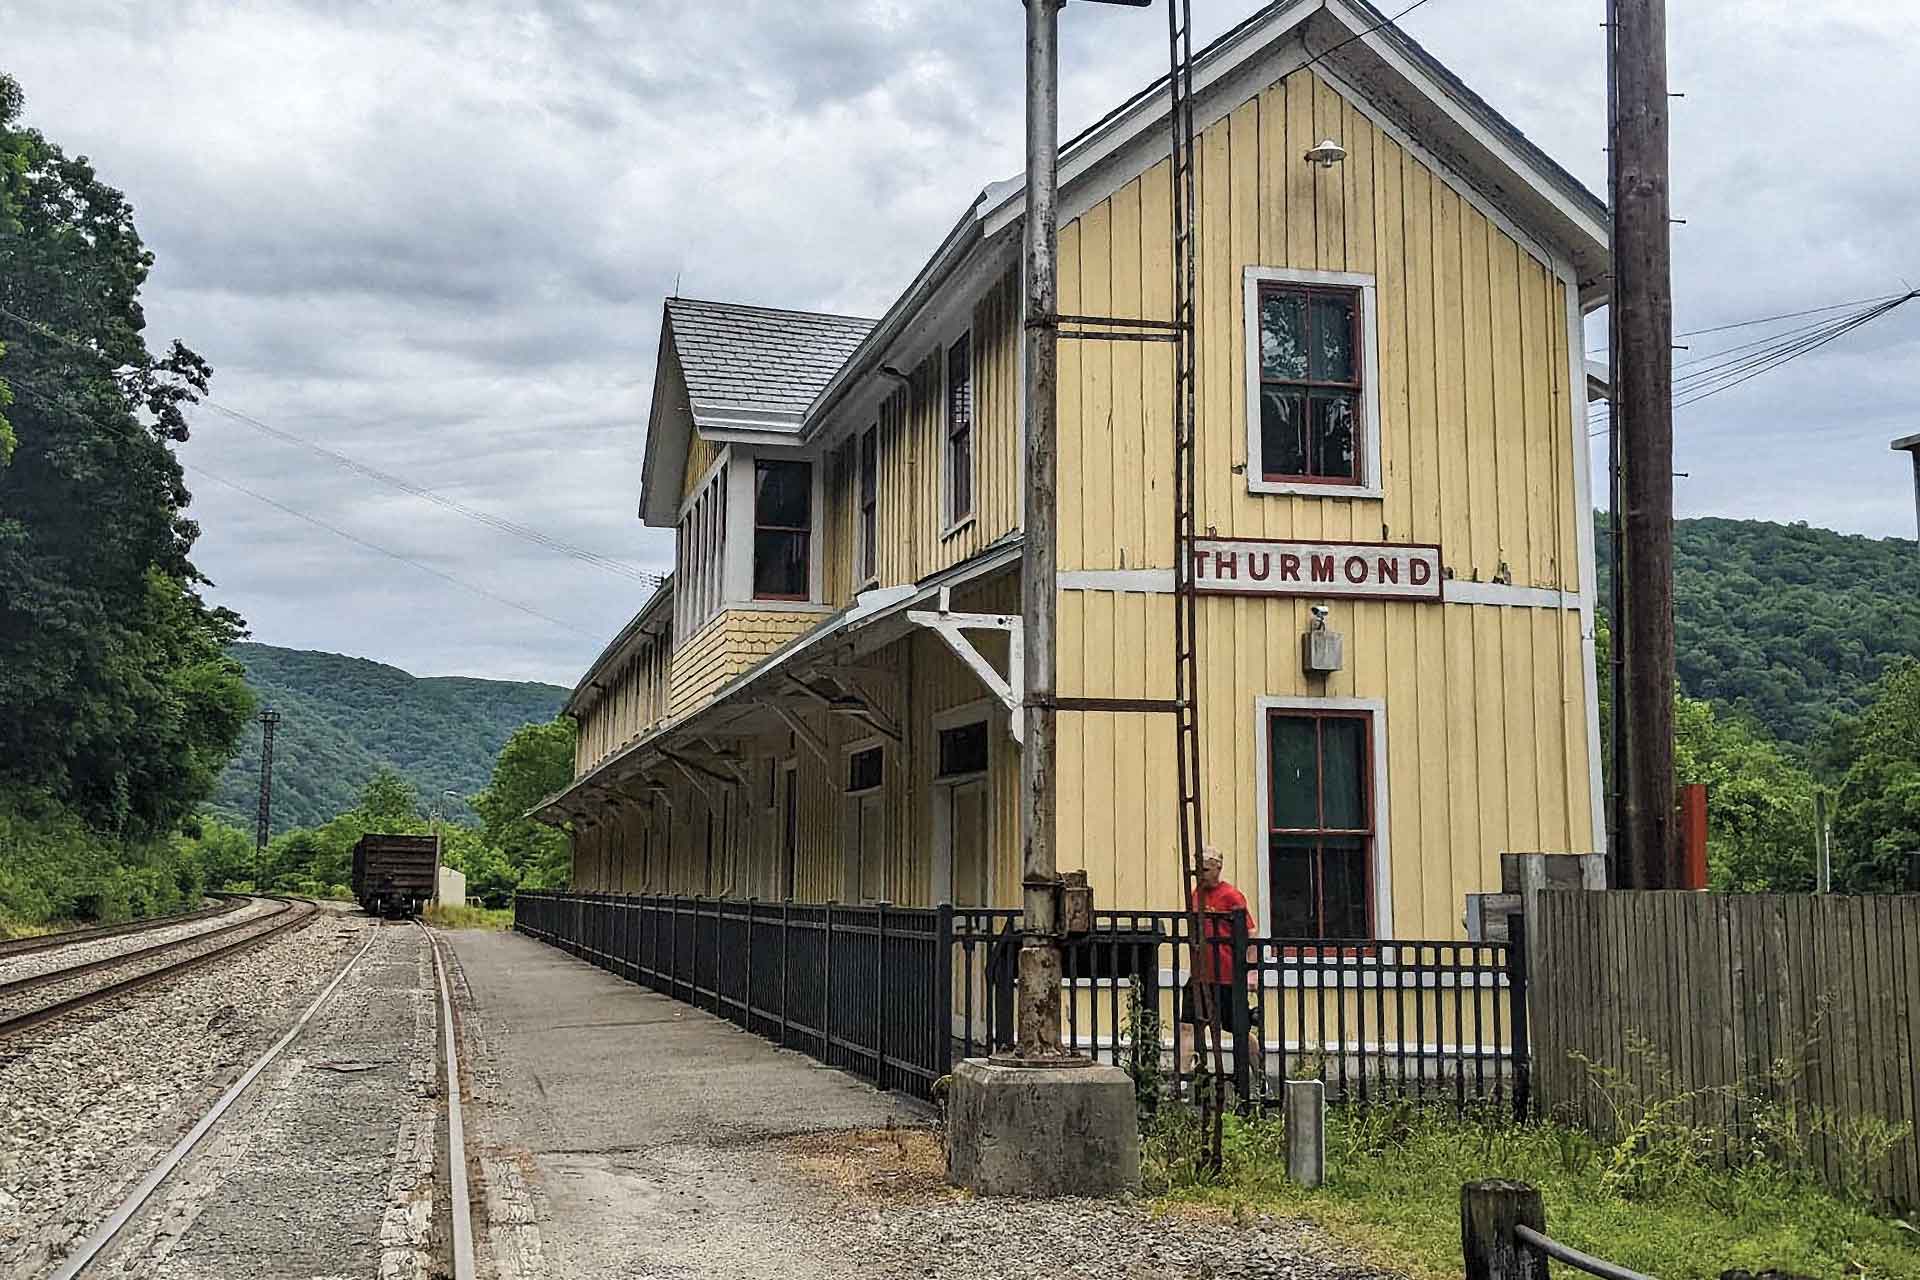 A yellow depot building stands beside an empty railroad track.